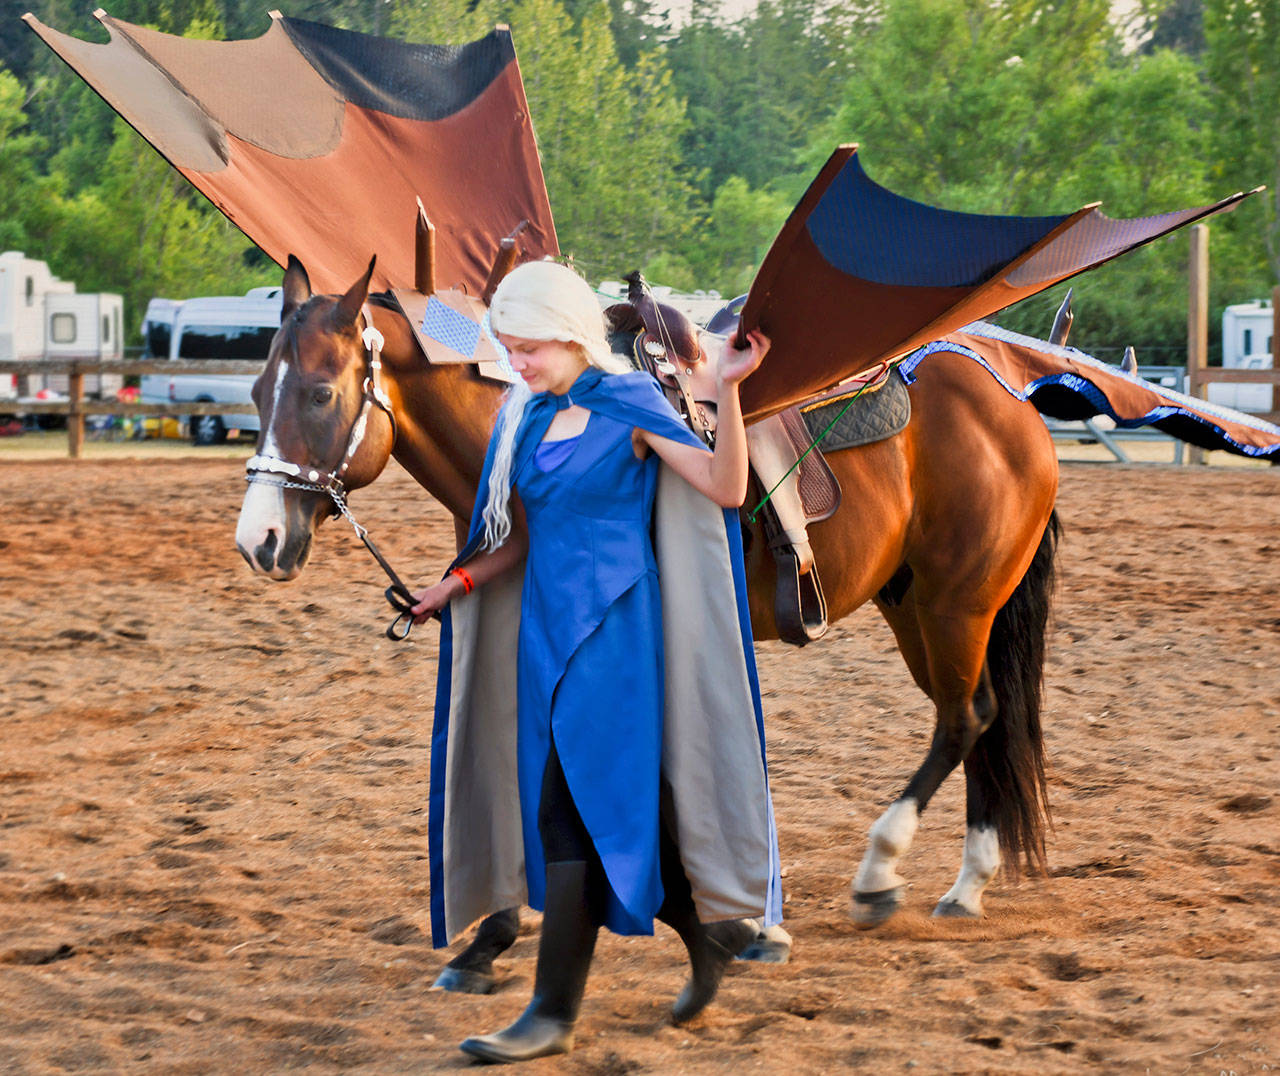 Taylor Maughan, 12, and Cody won the Grand Champions Costume competition at the Clallam County Fair last weekend. Taylor’s costume, which includes her horse wearing moveable wings, was based on the “Game of Thrones” character Daenerys Targaryen, Mother of Dragons. (Theresa Powell)